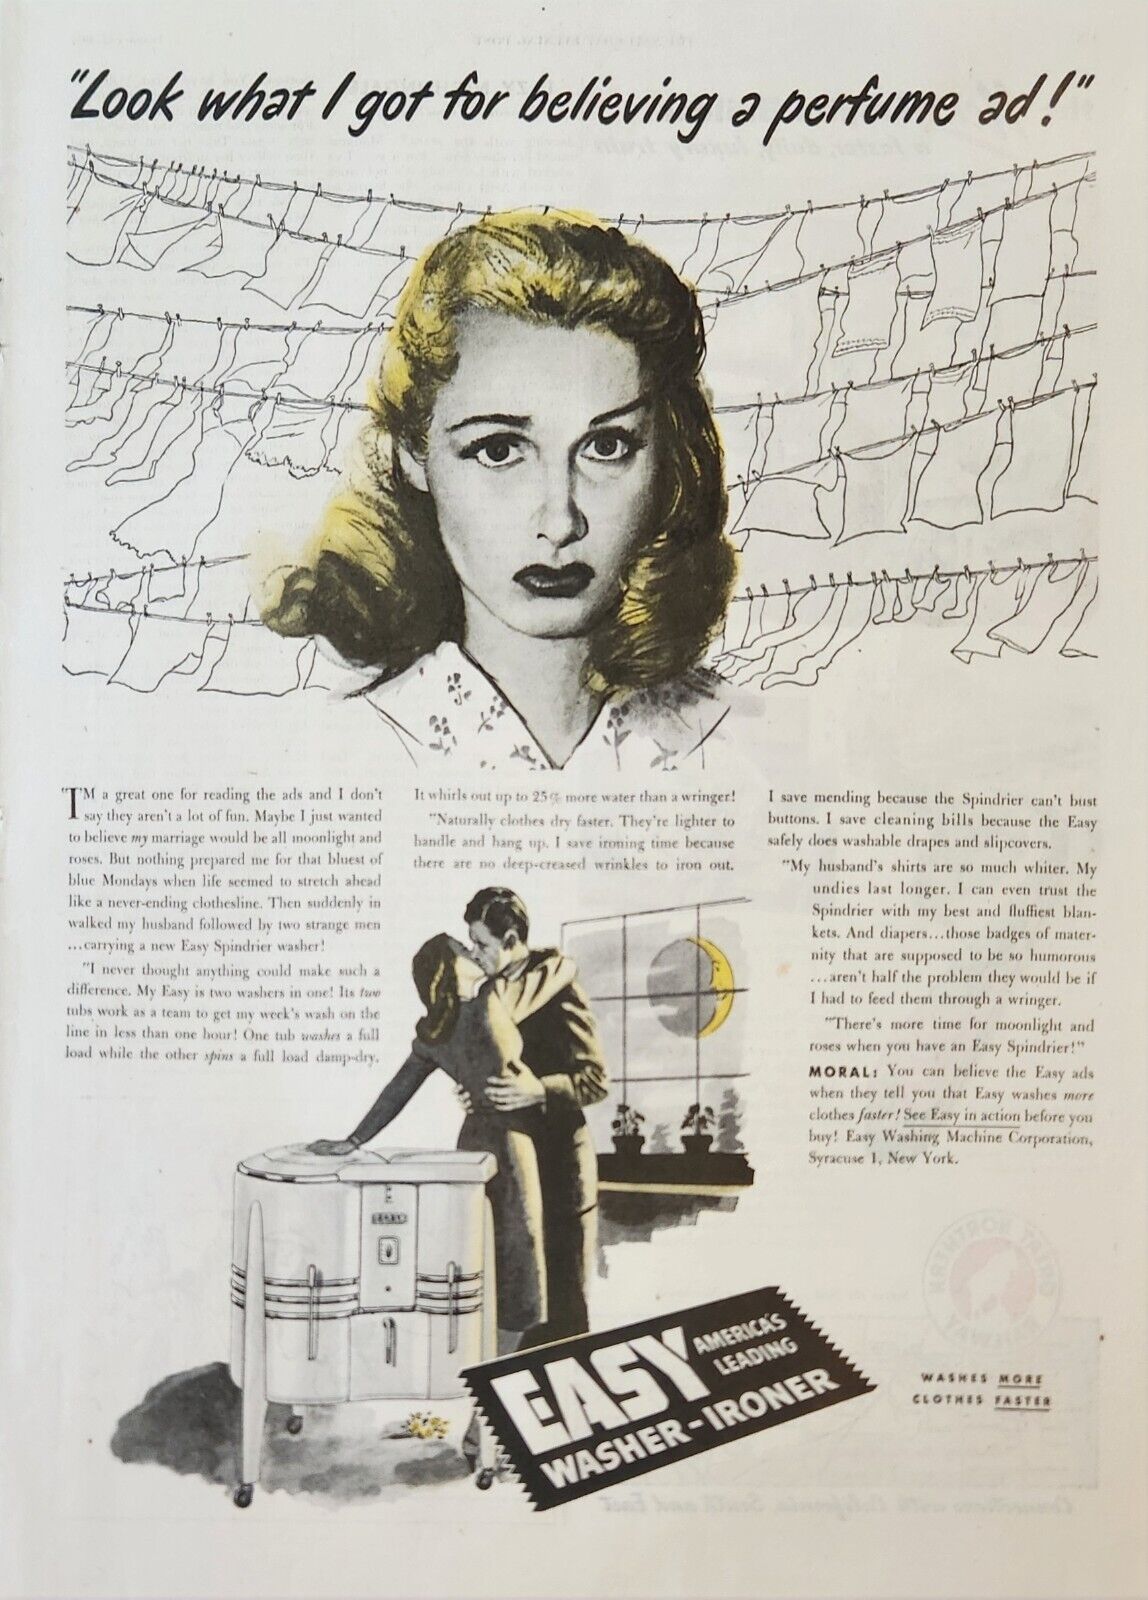 1947 Easy spindrier for clothes Vintage Ad Look what I got believing perfume ad